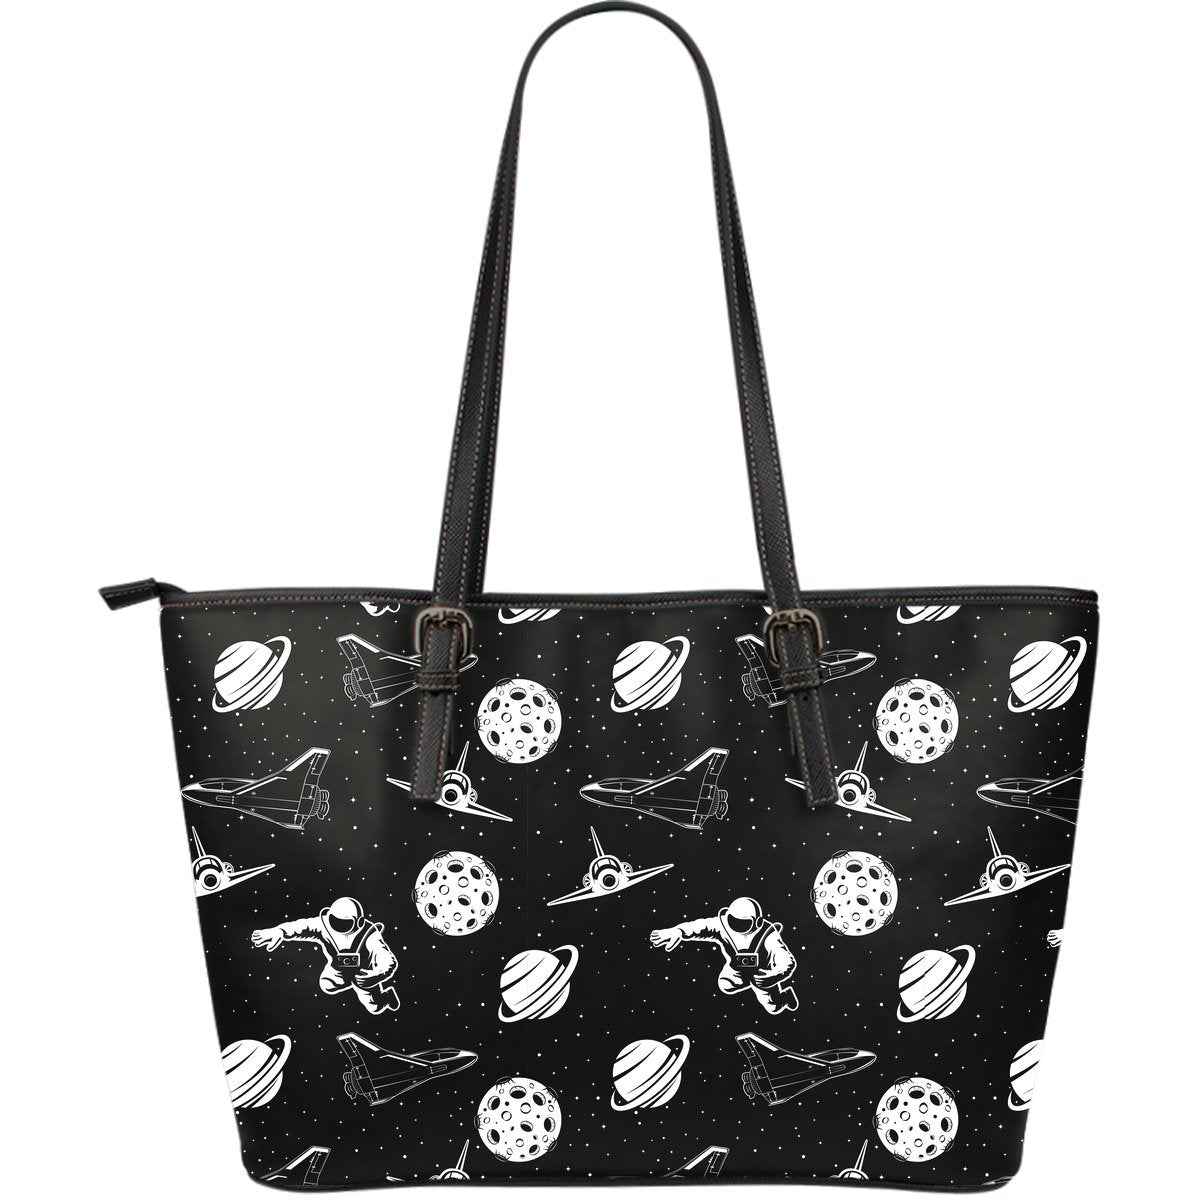 Space Astronauts Print Large Leather Tote Bag